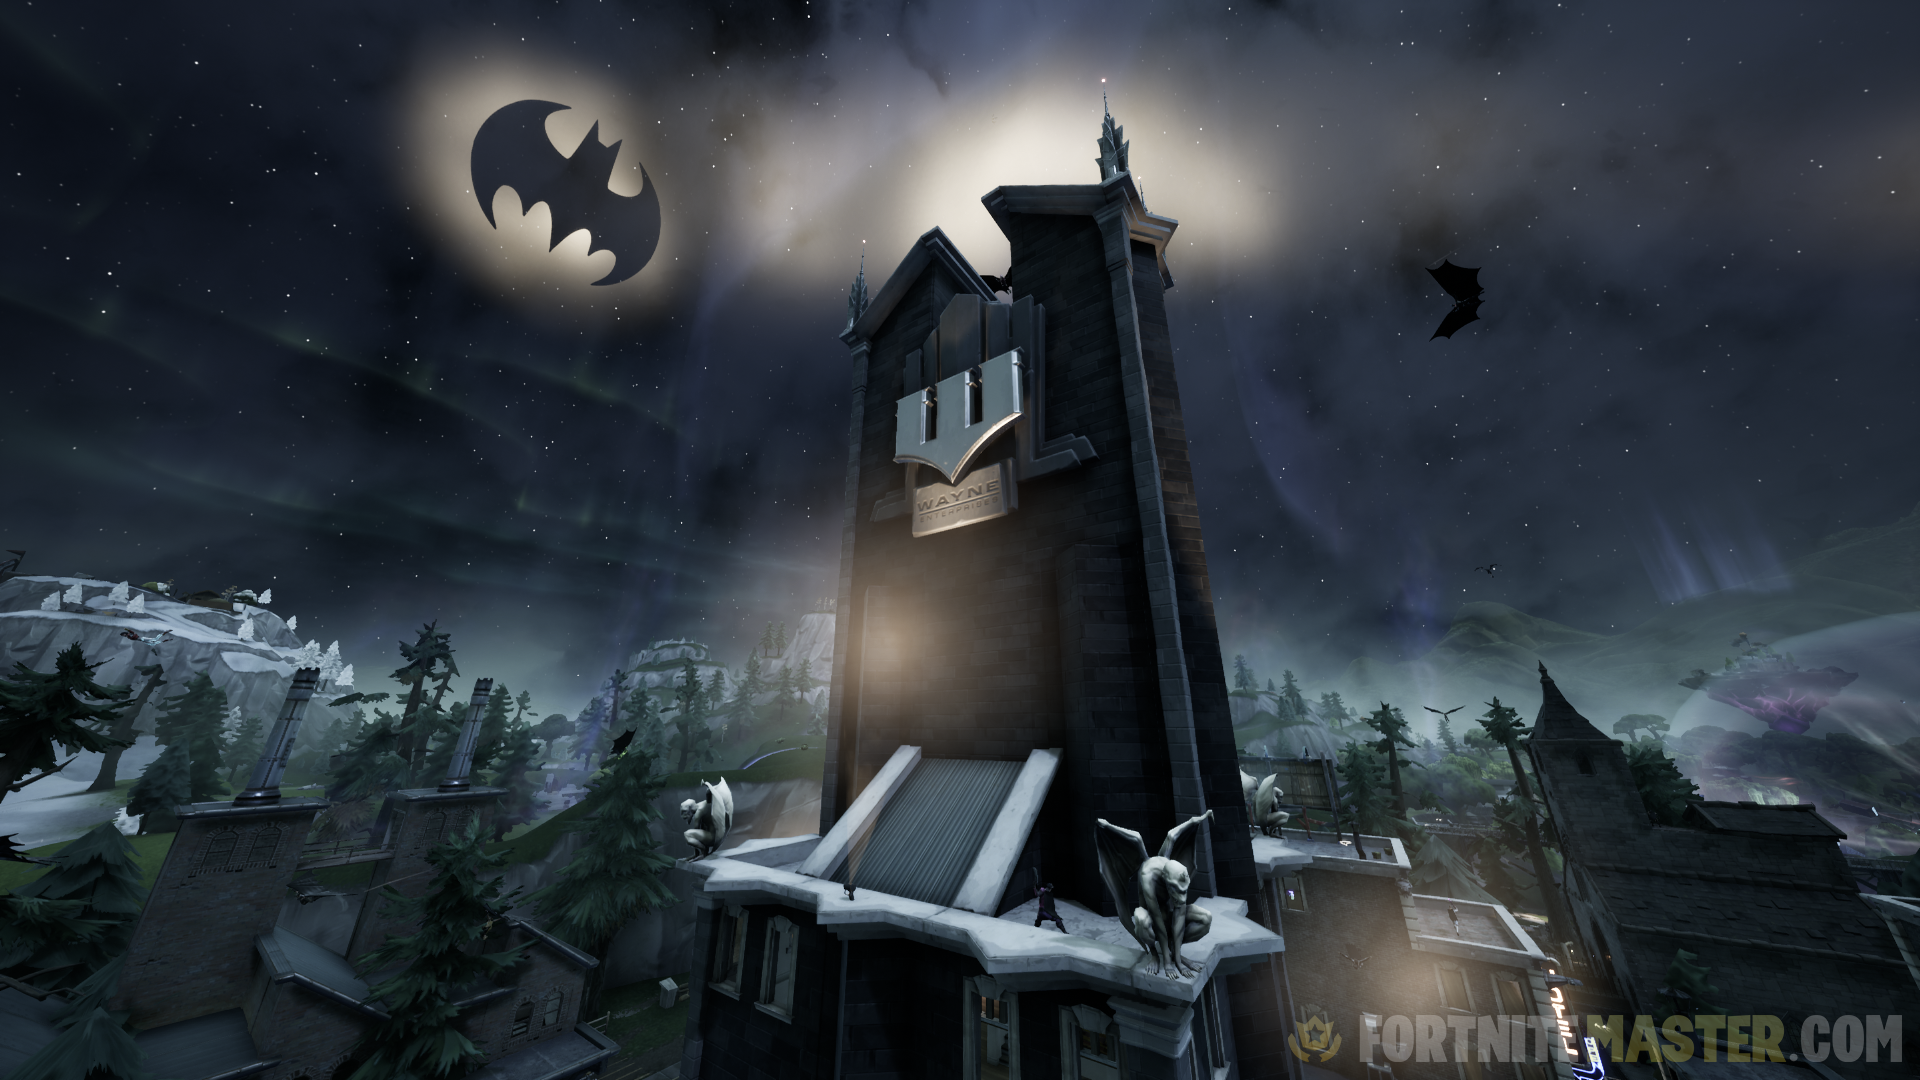 What do you guys think about Gotham in fortnite?